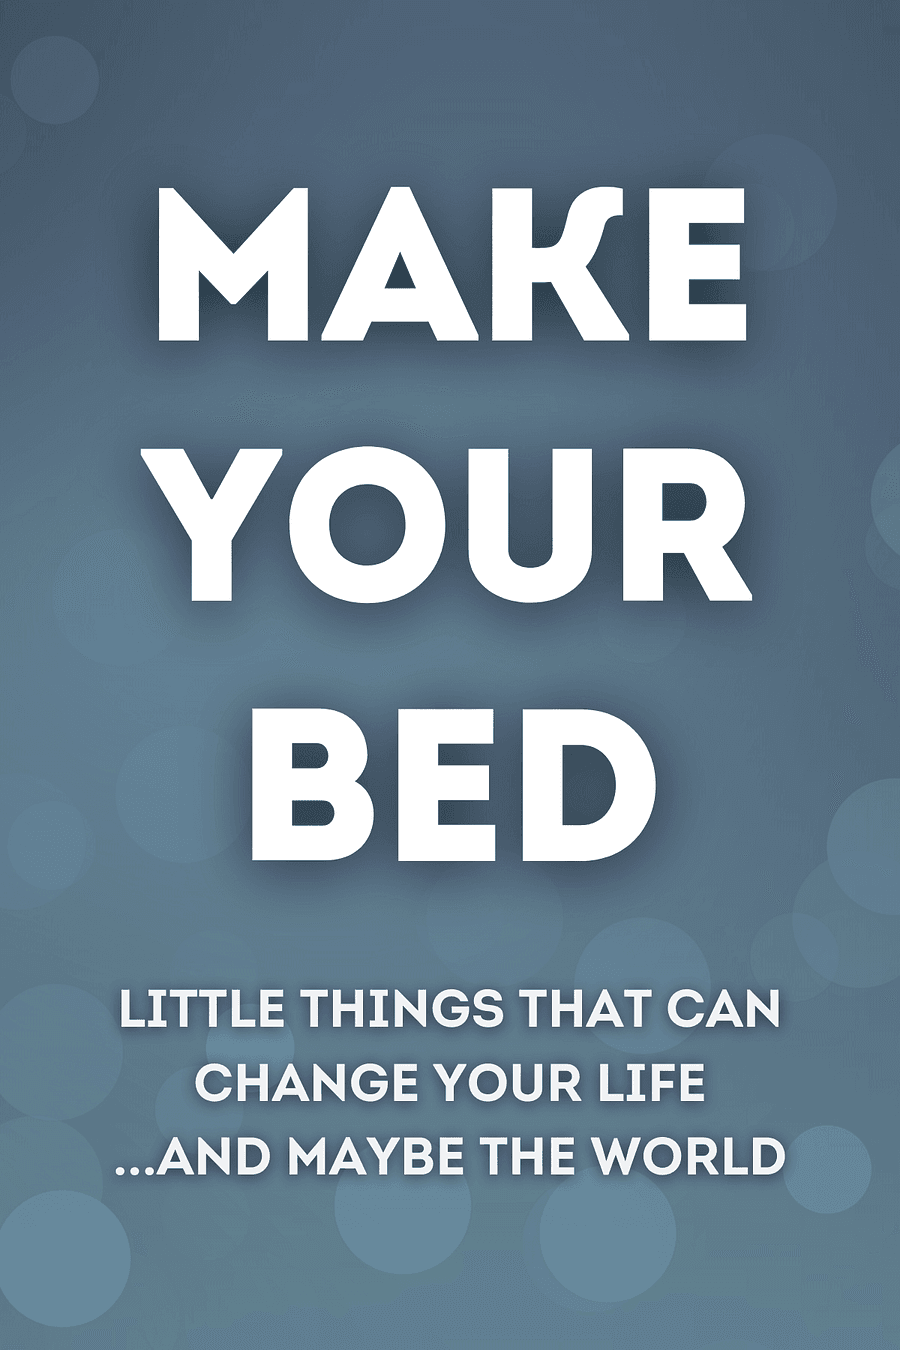 Make Your Bed by William H. McRaven - Book Summary